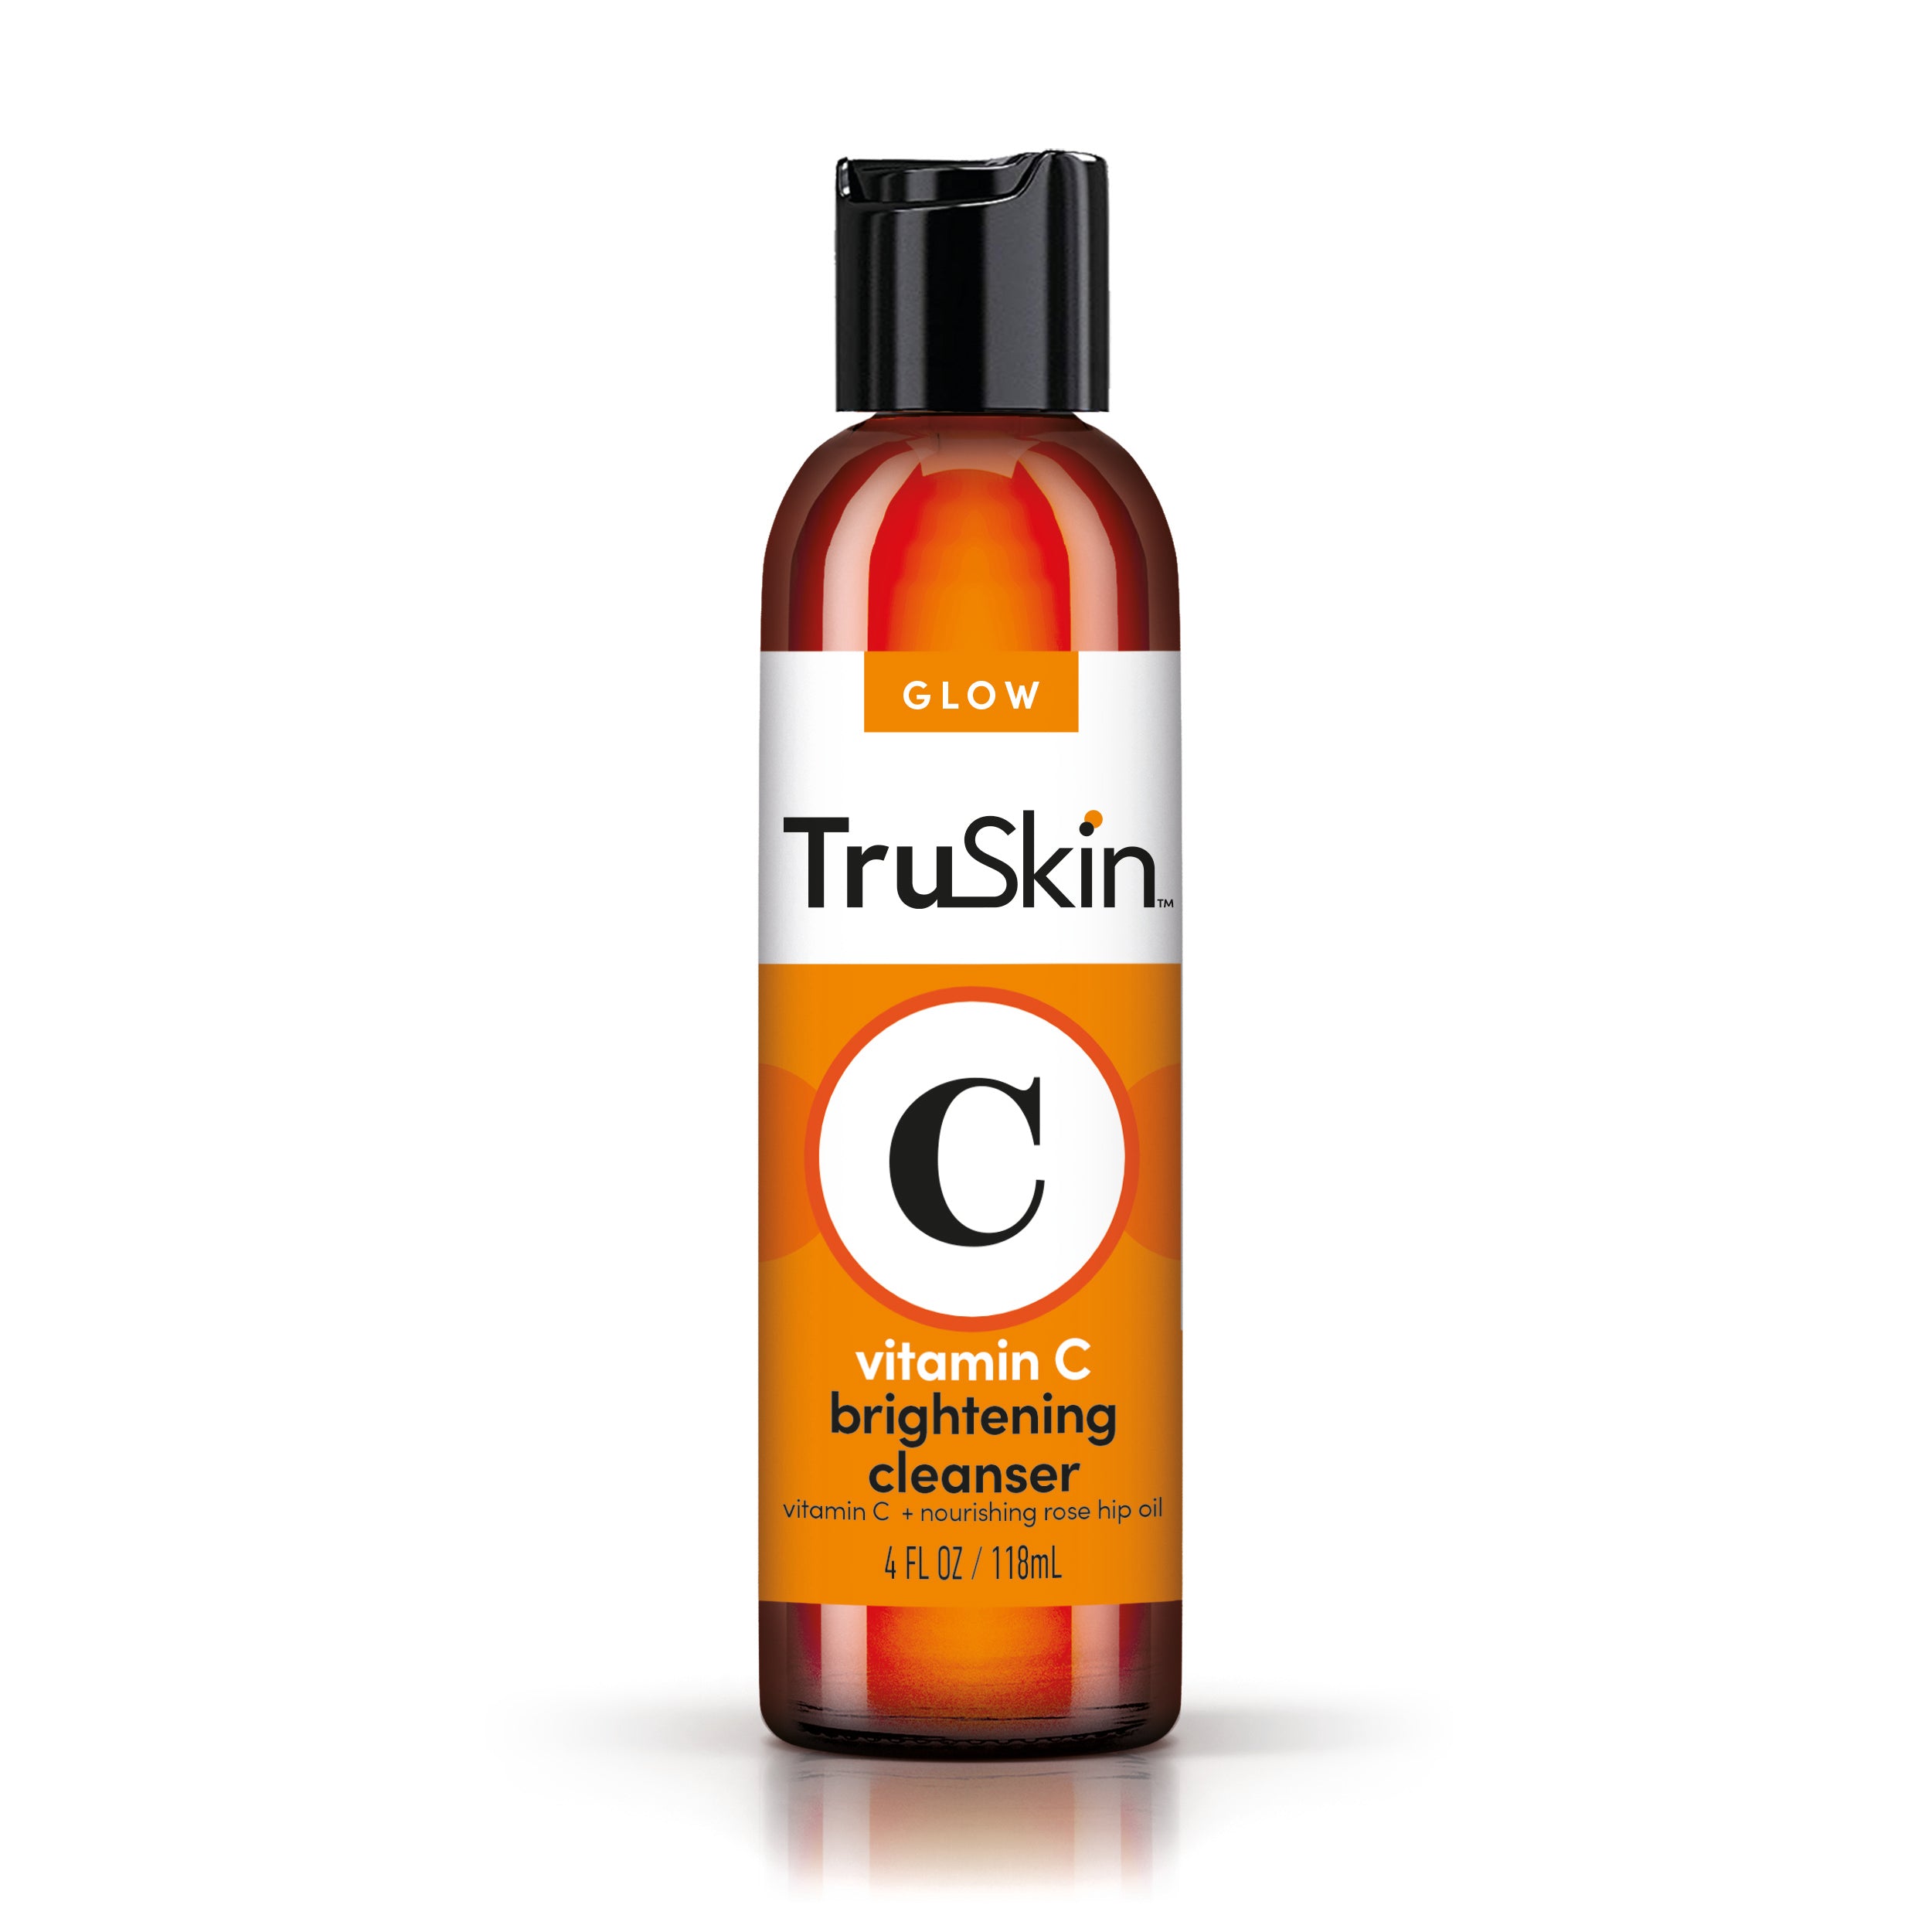 TruSkin Daily Facial Cleanser